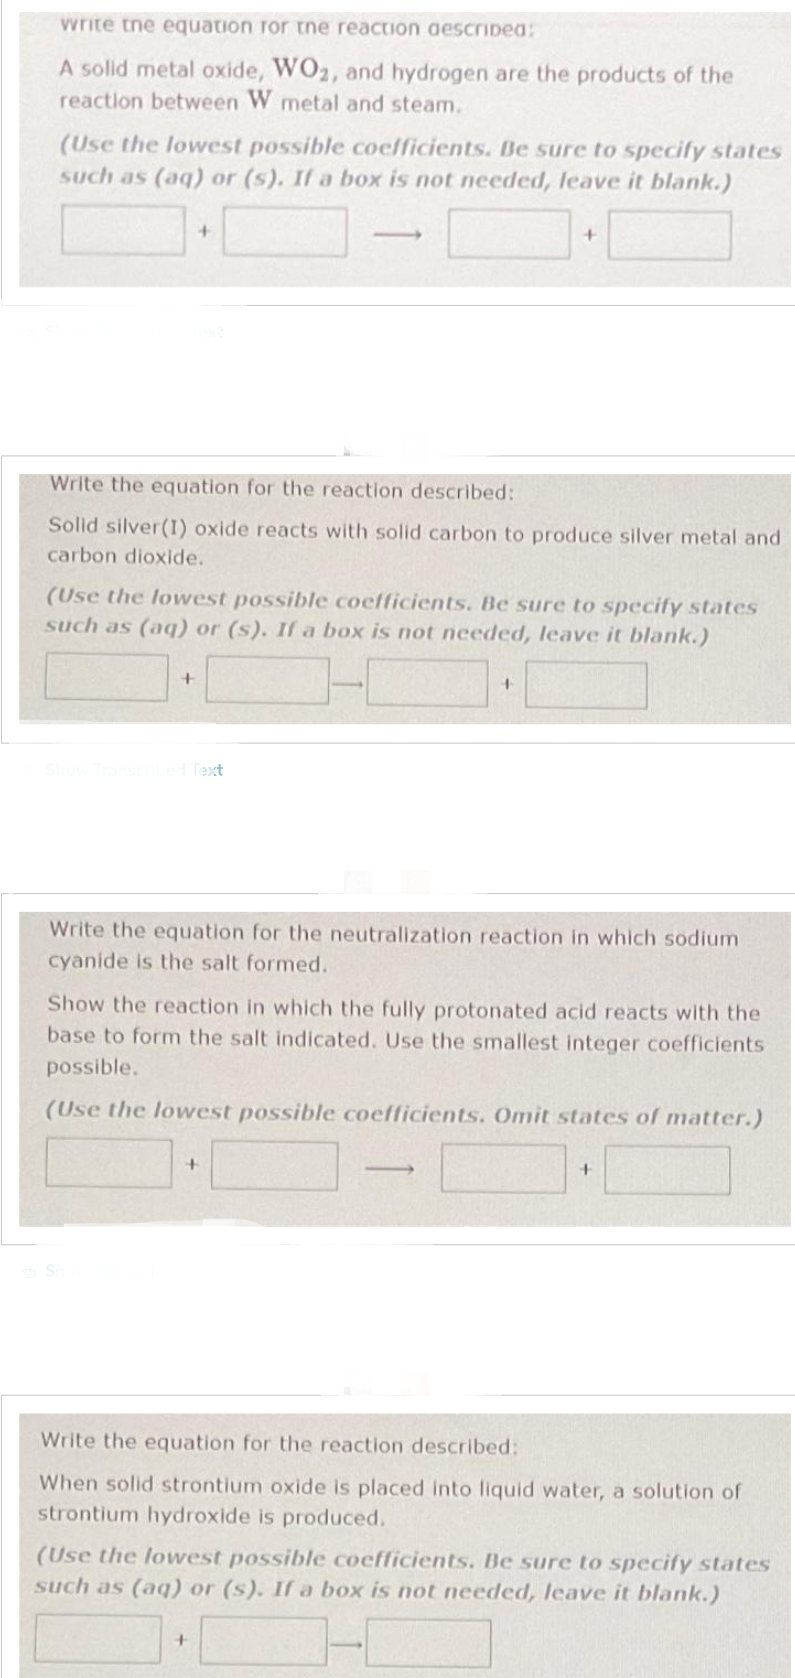 write the equation for the reaction described:
A solid metal oxide, WO2, and hydrogen are the products of the
reaction between W metal and steam.
(Use the lowest possible coefficients. Be sure to specify states
such as (aq) or (s). If a box is not needed, leave it blank.)
Write the equation for the reaction described:
Solid silver (1) oxide reacts with solid carbon to produce silver metal and
carbon dioxide.
+
(Use the lowest possible coefficients. Be sure to specify states
such as (aq) or (s). If a box is not needed, leave it blank.)
+
Show Transcribed Text
Sh
Write the equation for the neutralization reaction in which sodium
cyanide is the salt formed.
+
Show the reaction in which the fully protonated acid reacts with the
base to form the salt indicated. Use the smallest integer coefficients
possible.
(Use the lowest possible coefficients. Omit states of matter.)
+
+
-
+
+
Write the equation for the reaction described:
When solid strontium oxide is placed into liquid water, a solution of
strontium hydroxide is produced.
(Use the lowest possible coefficients. Be sure to specify states
such as (aq) or (s). If a box is not needed, leave it blank.)